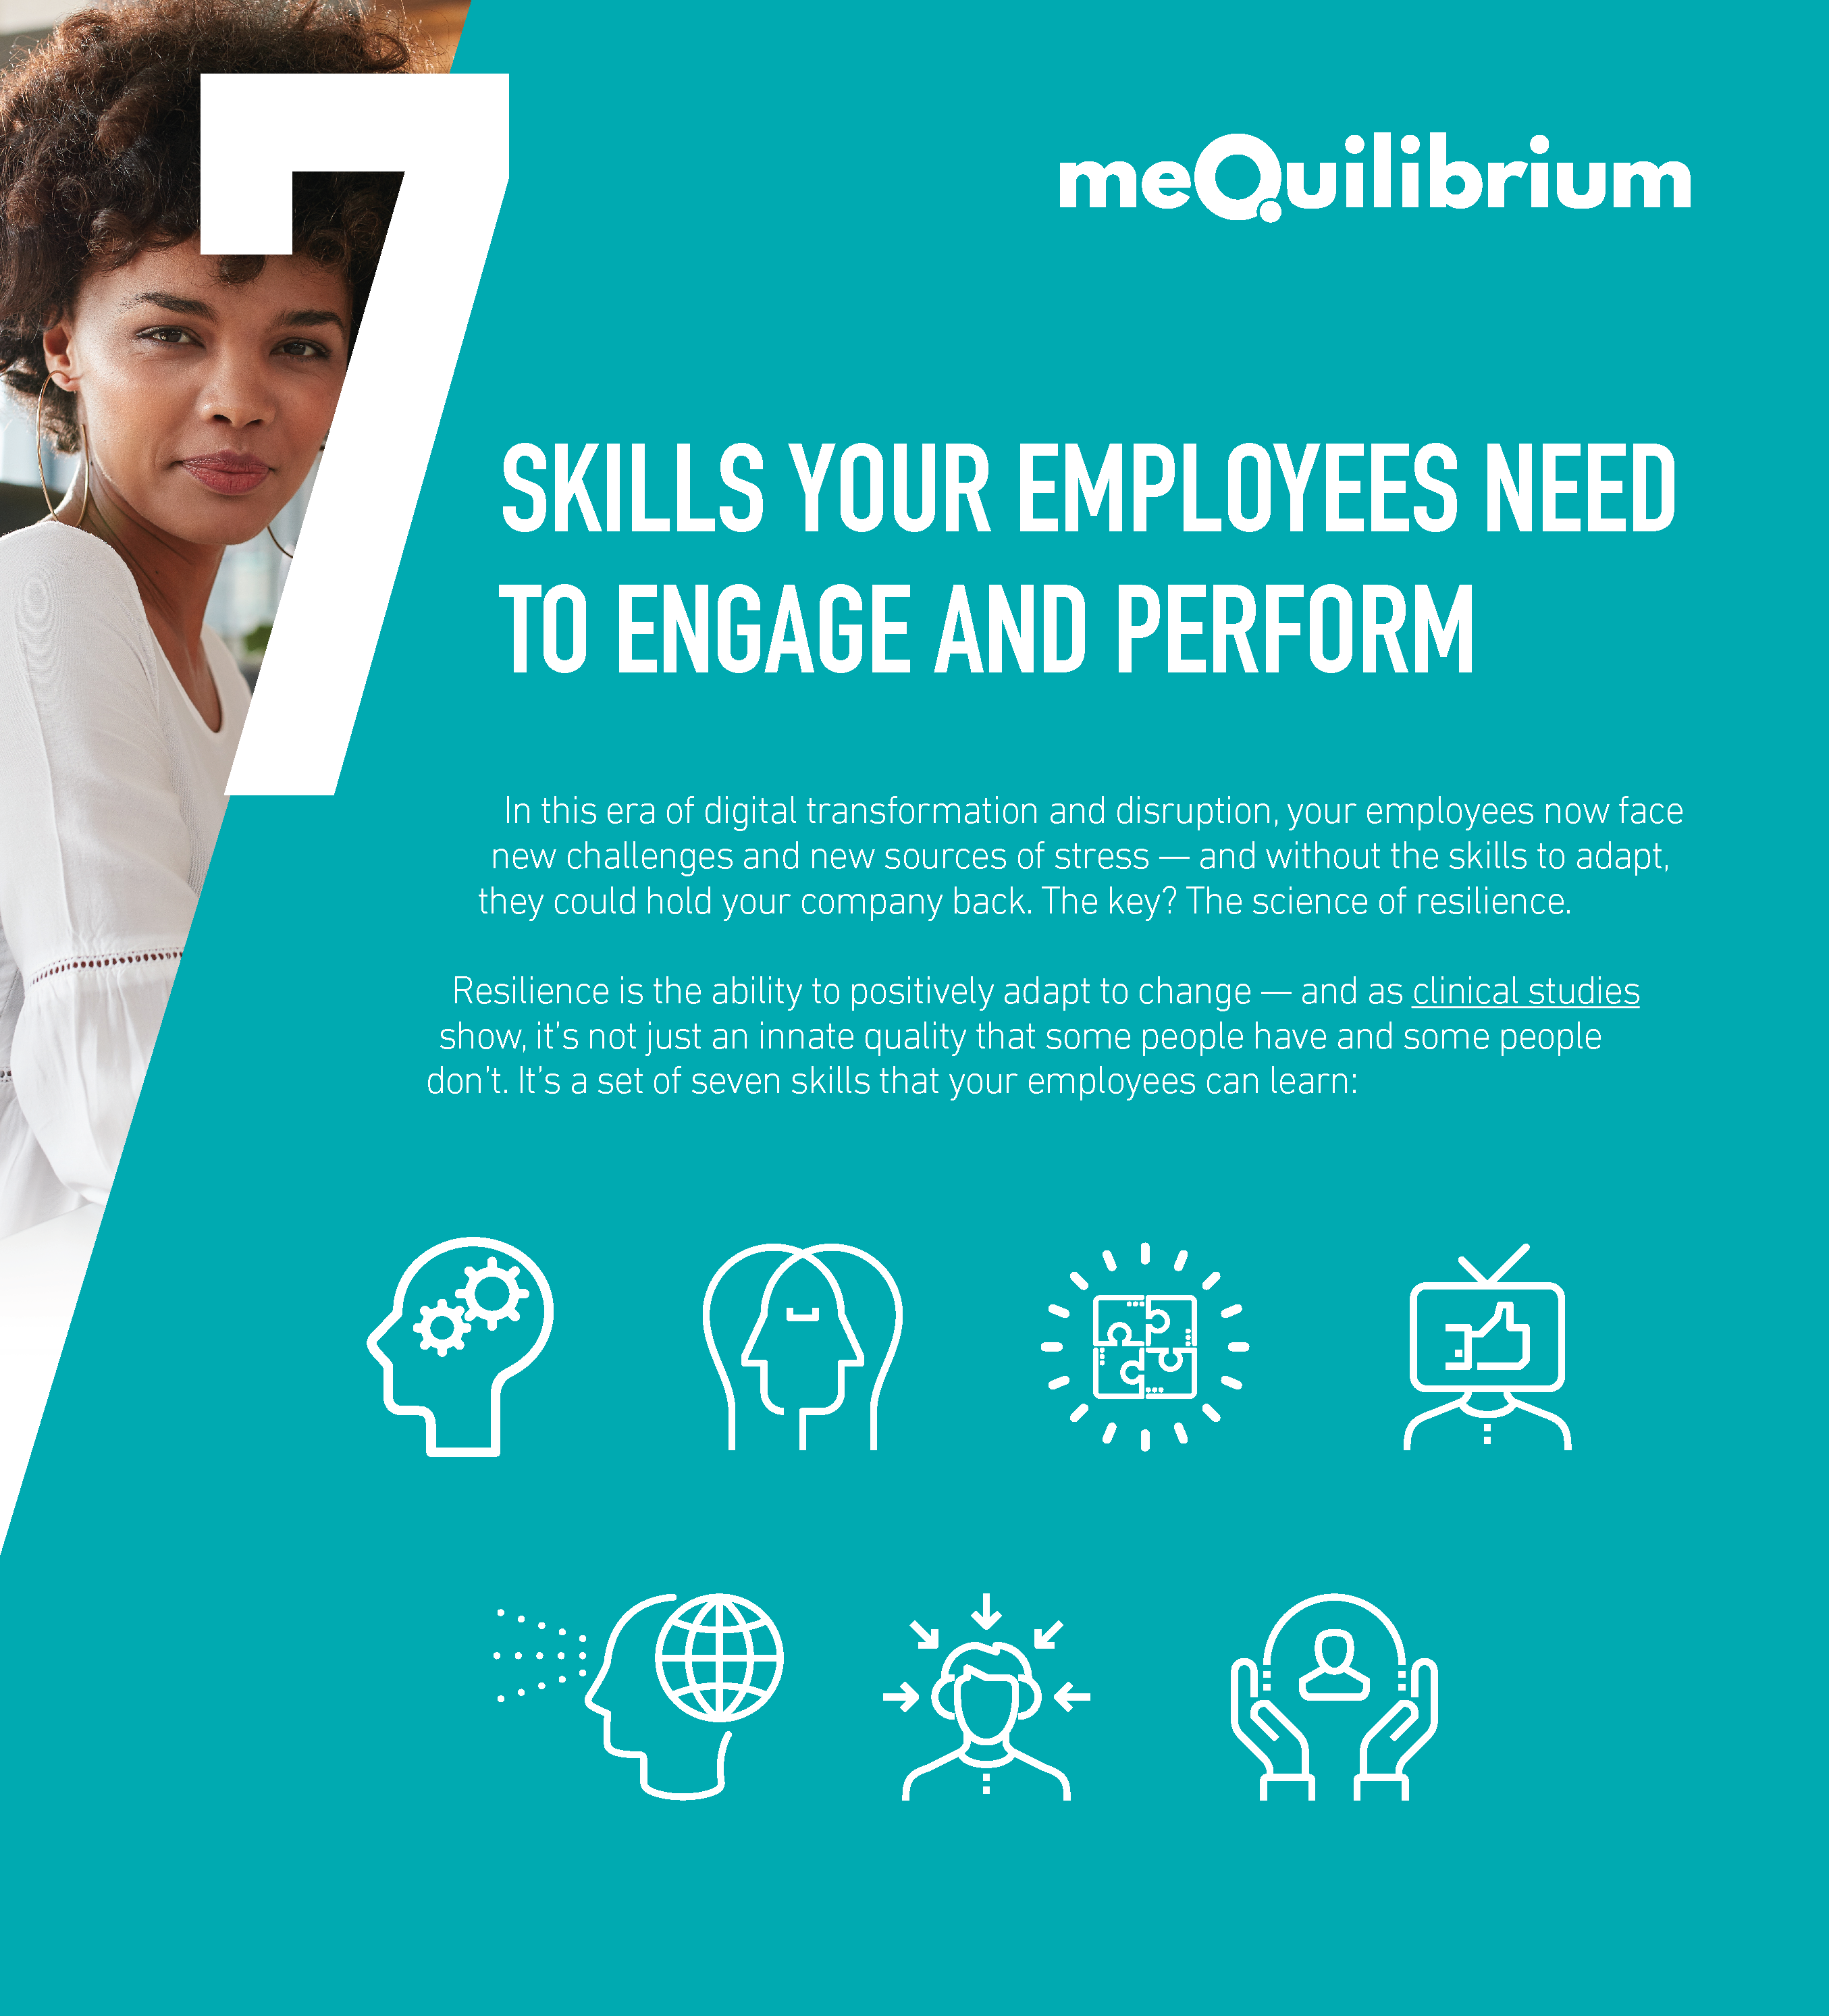 7 Skills Your Employees Need to Engage and Perform